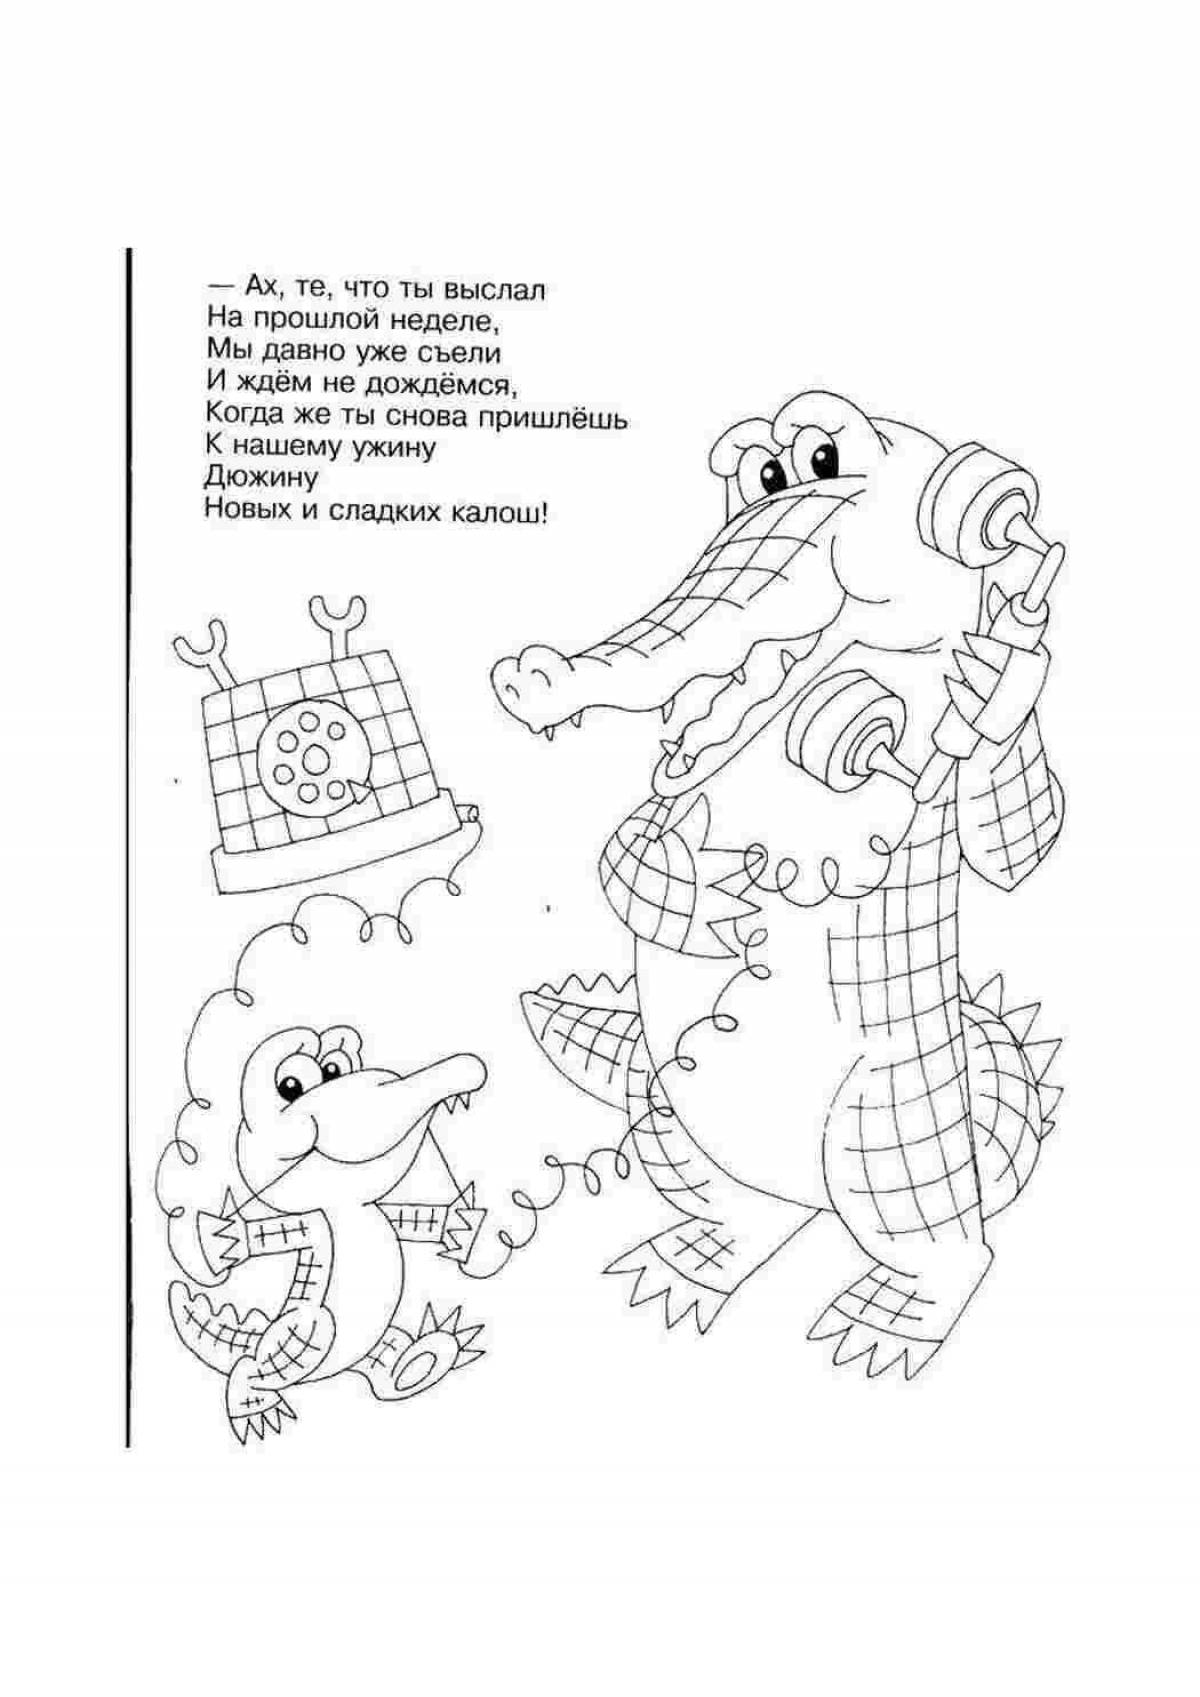 Chukovsky's whimsical tale coloring book